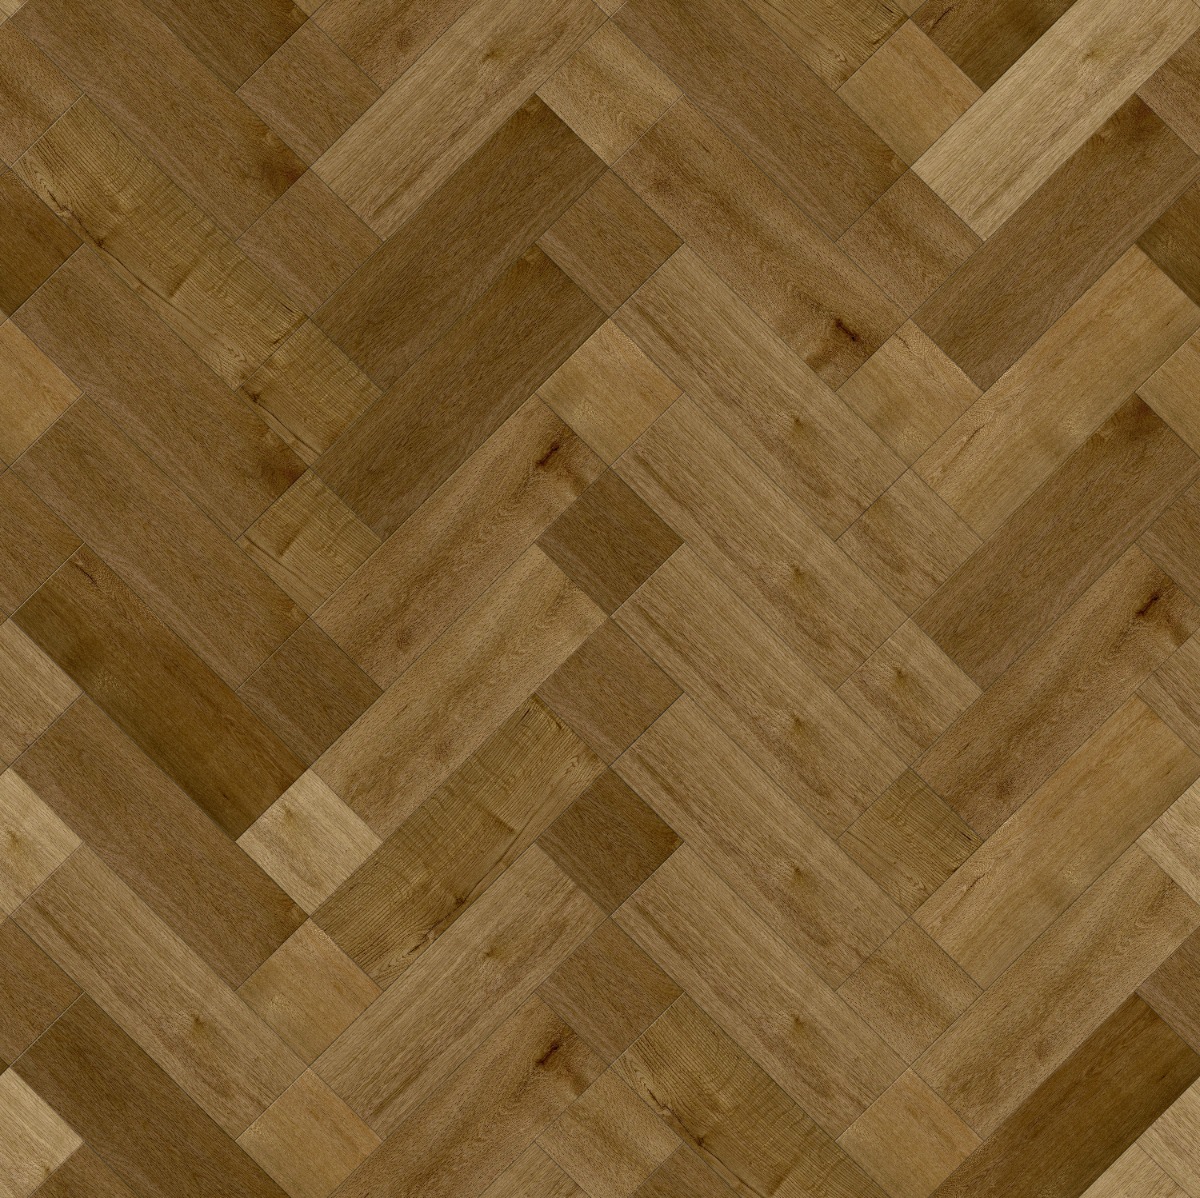 A seamless wood texture with benchmark 3040 boards arranged in a Chantilly pattern